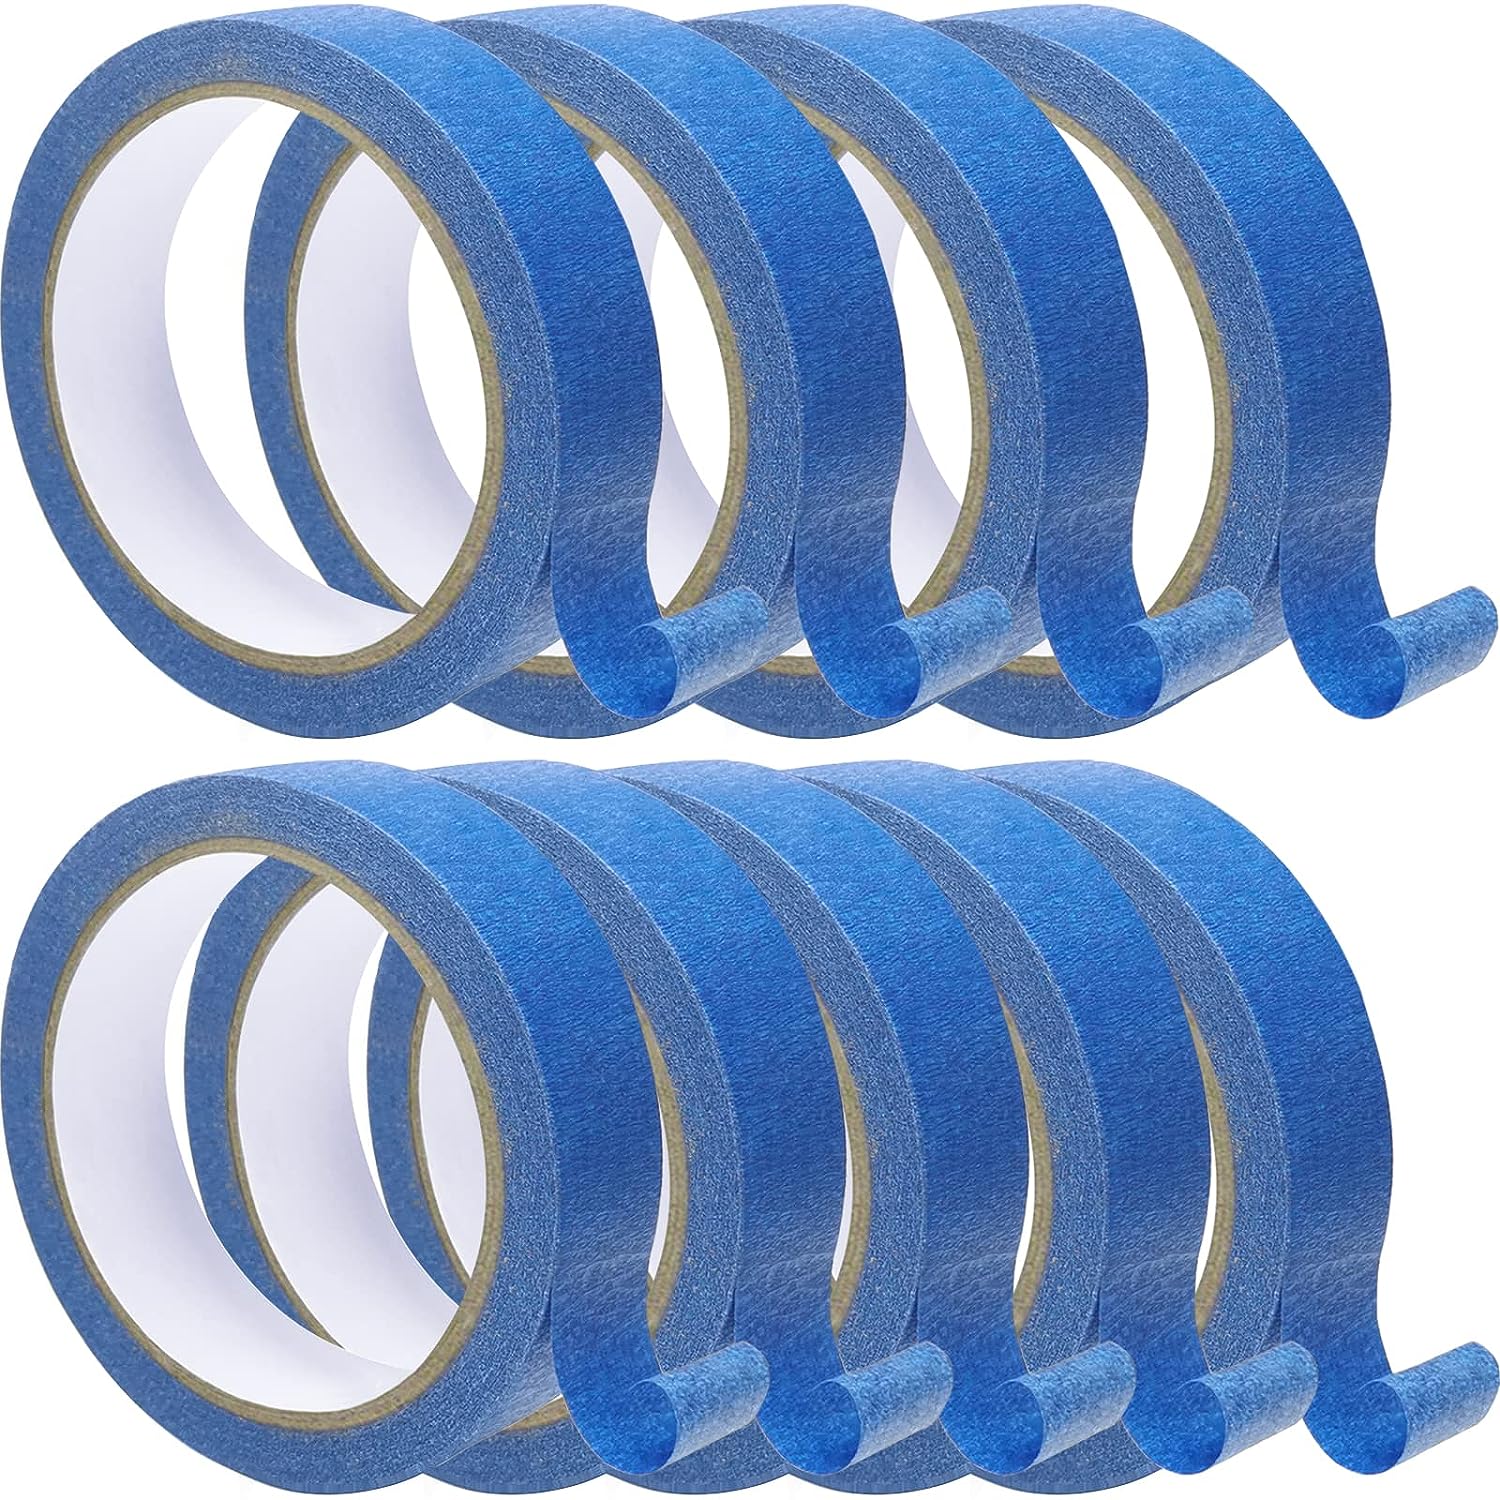 JIALAI HOME Blue Painters Tape 0.94 Inches x 60 Yards 3 Pack